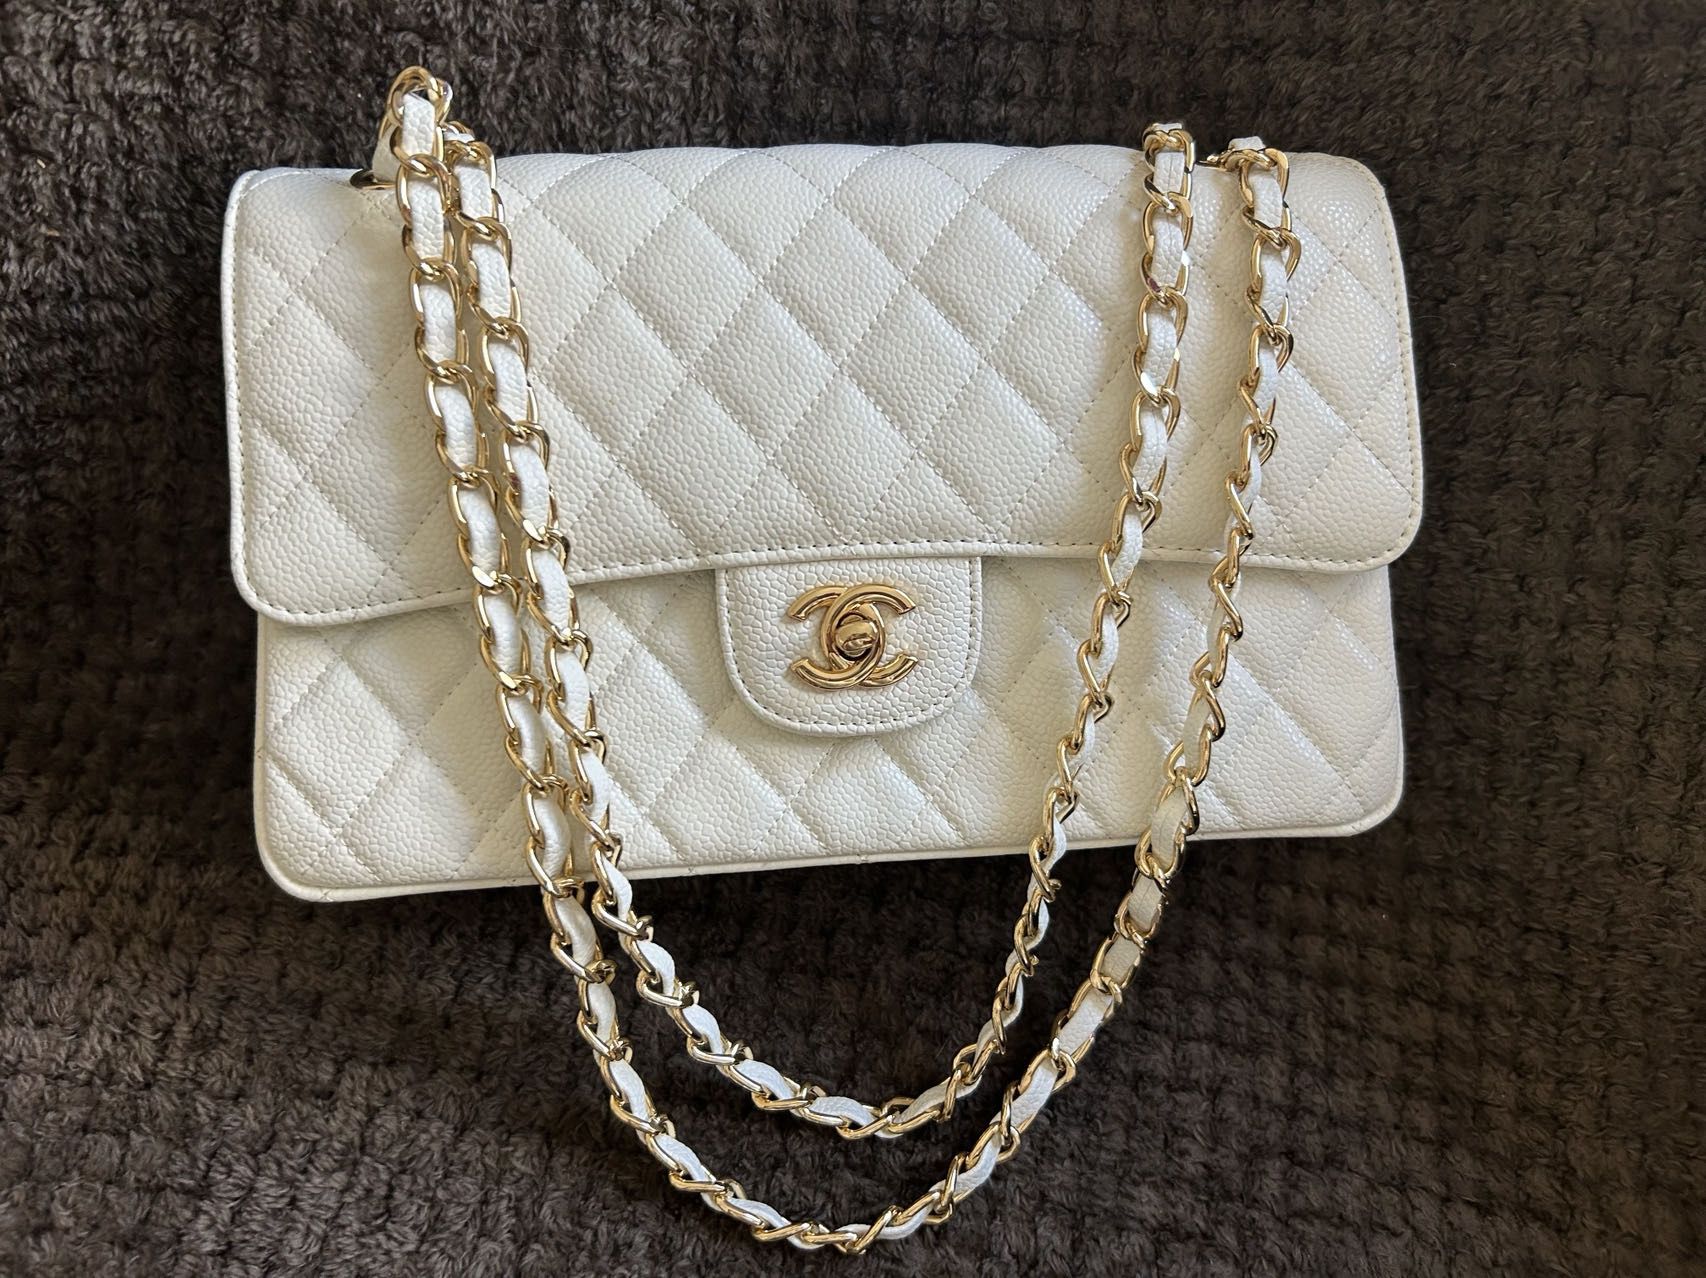 Chanel White Caviar Purse Real Leather